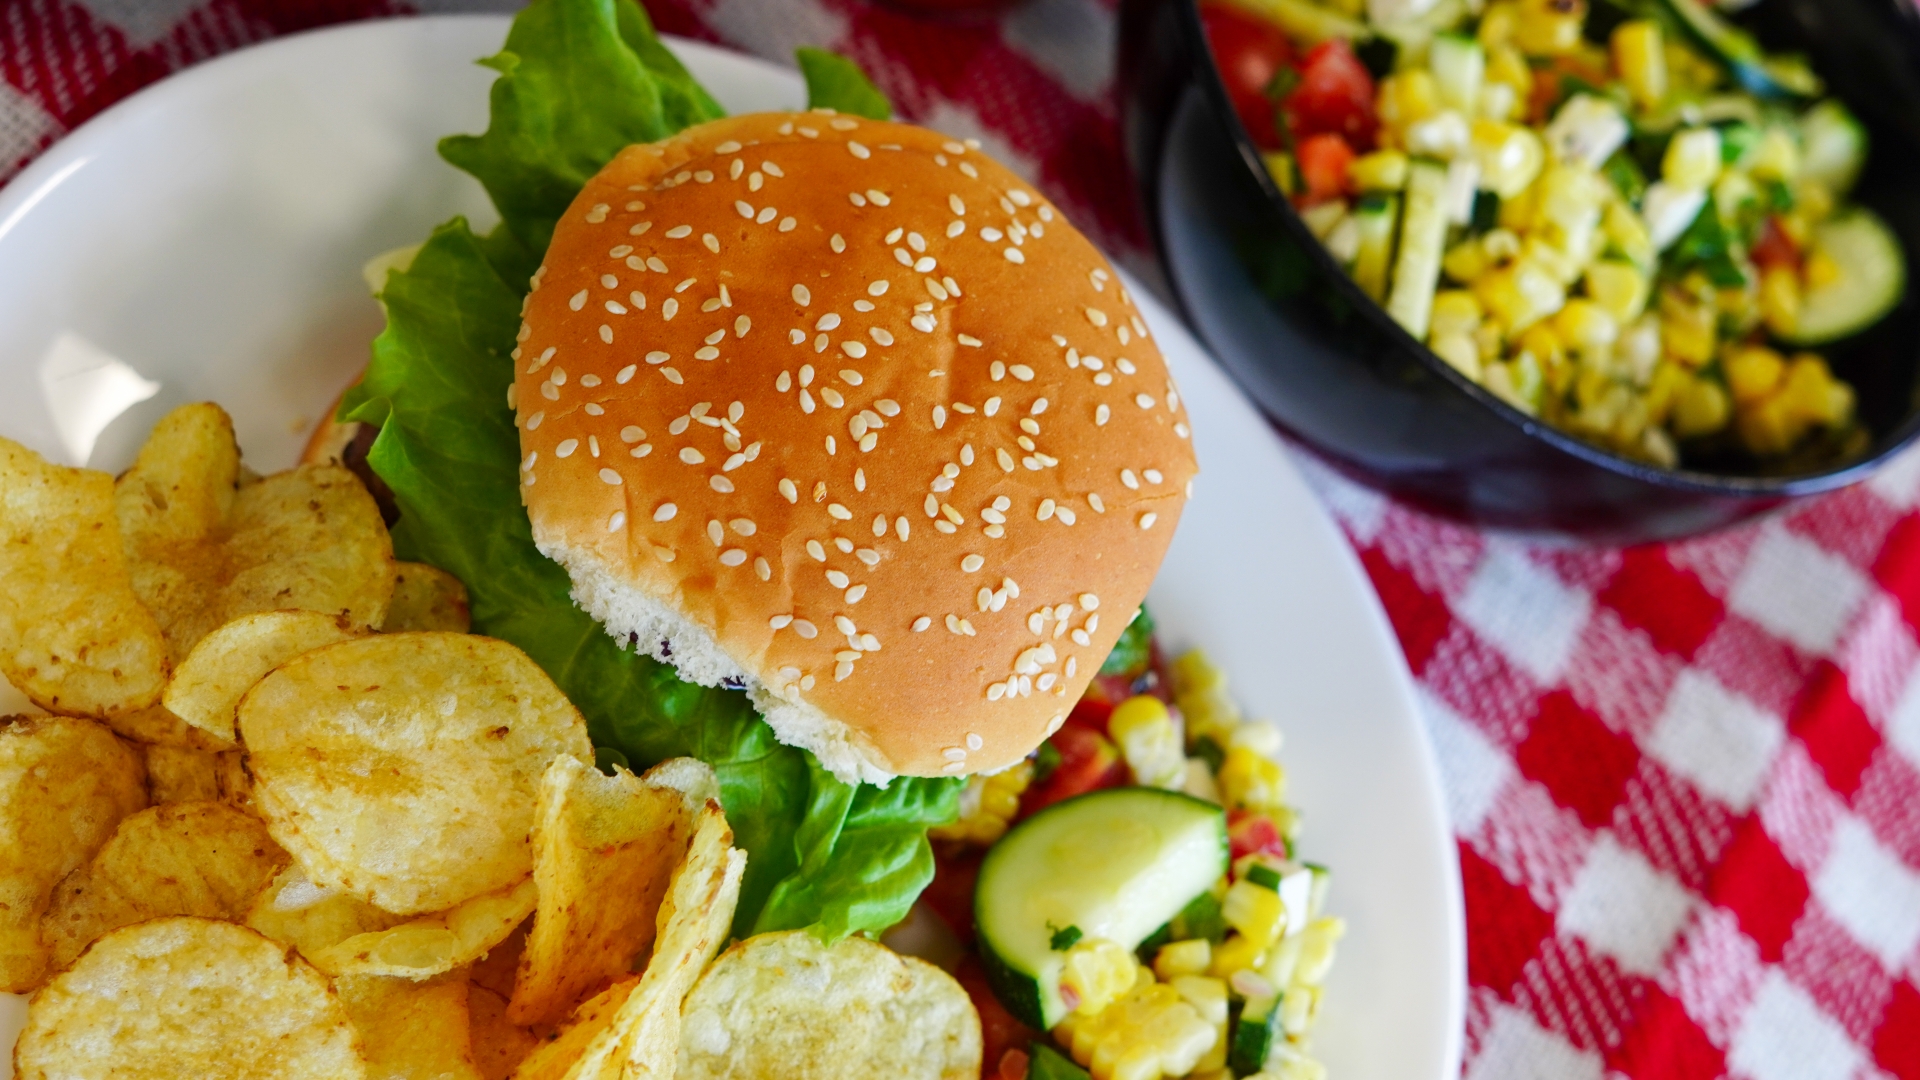 A top down view of a round white plate on a red and white checked tablecloth. There is a burger with a seeded bun and green lettuce sticking out the sides on the plate, along with a pile of yellow potato chips and a pile of corn and zucchini salad with tomato and herbs.